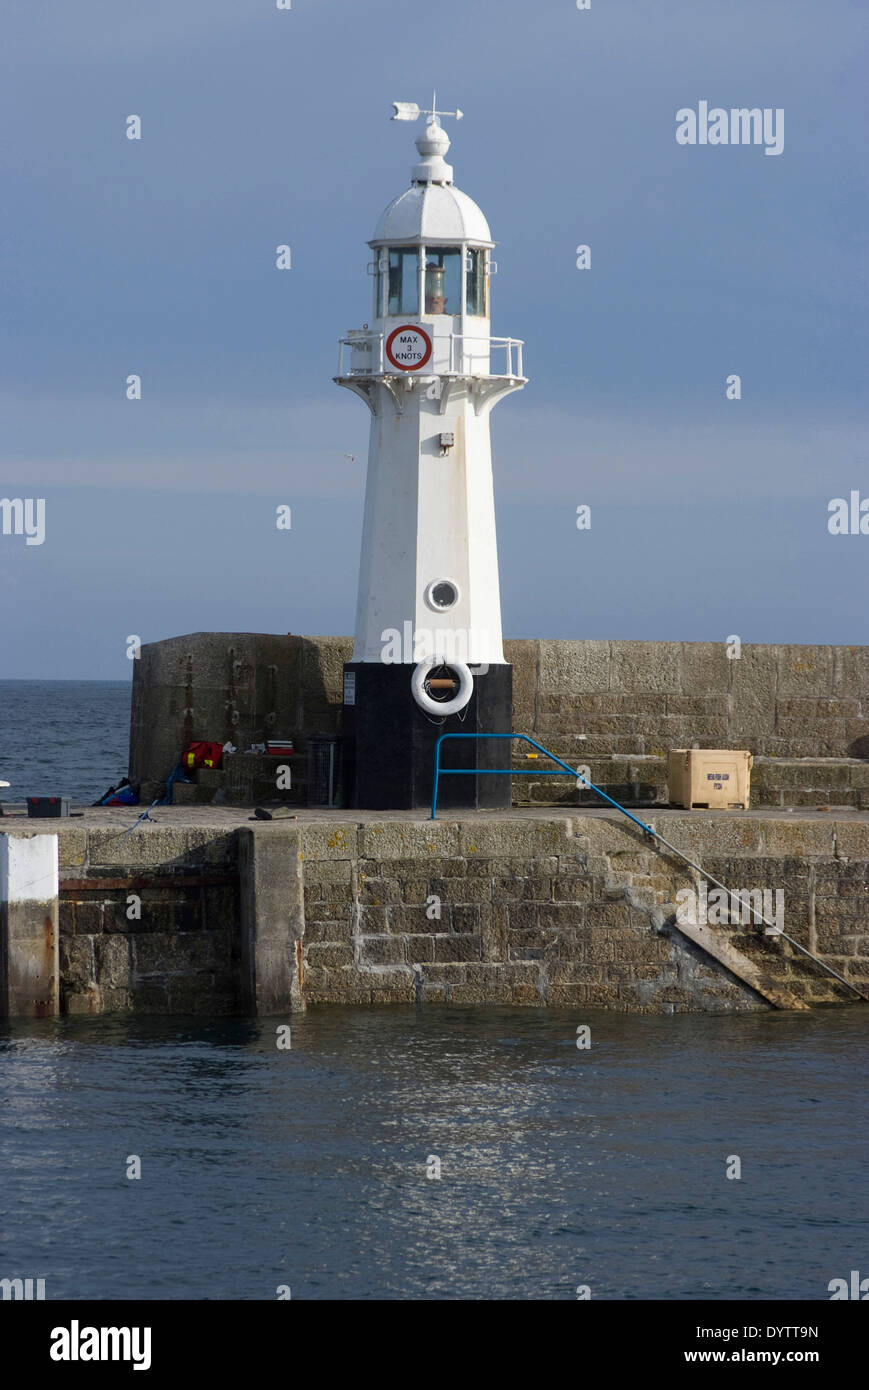 Lighthouse at the harbour, Mevagissey, Cornwall, UK Stock Photo